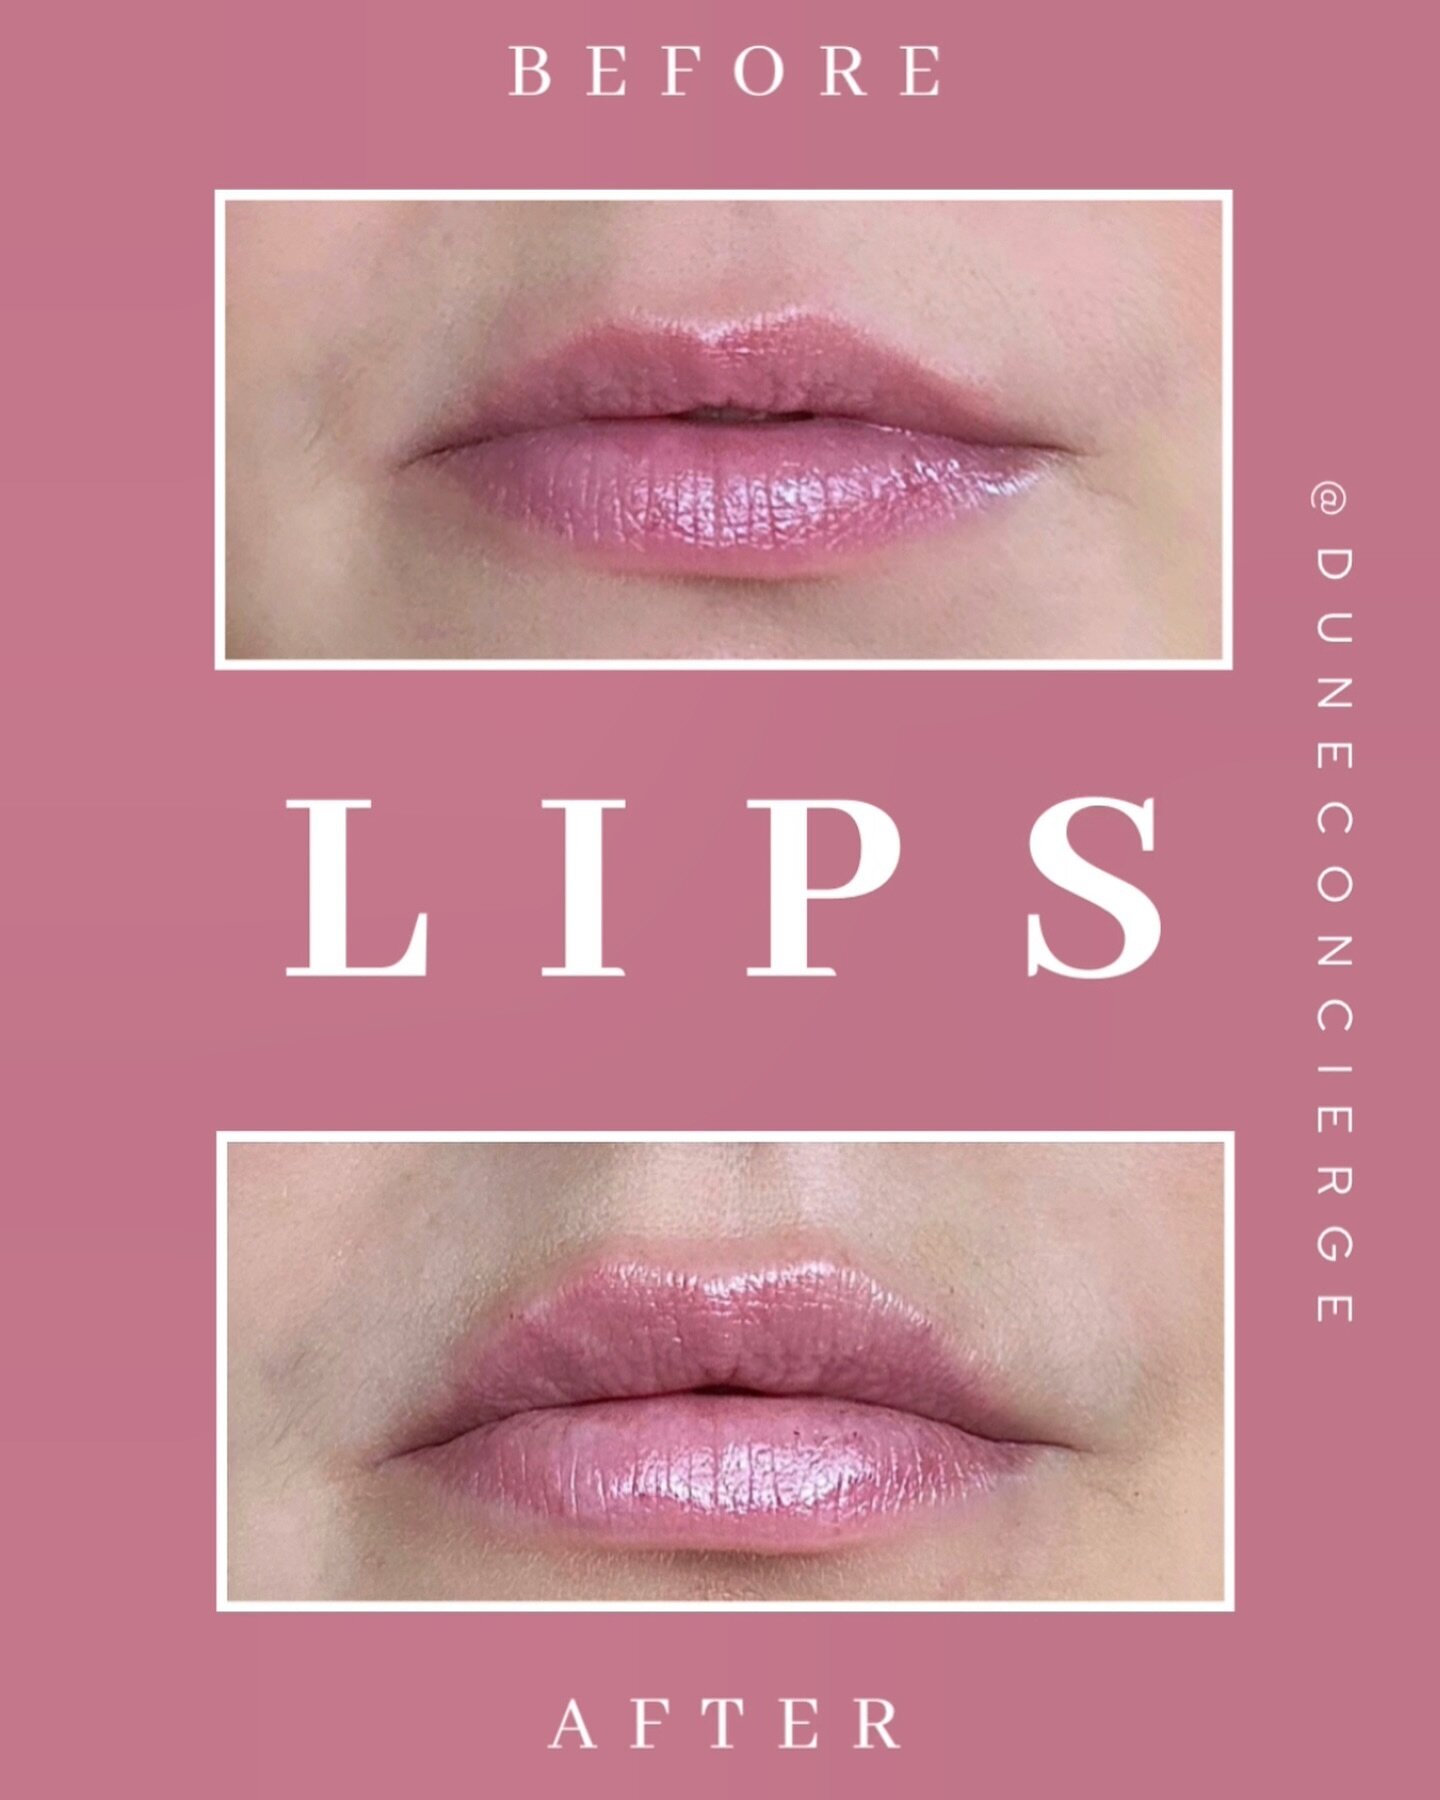 Embracing the power of subtle enhancements✨💋

Lip filler before and after, using Juv&eacute;derm Ultra Plus XC for a natural enhancement. @sophiagr 

For Appointments:
📲Text: (347) 271-0816